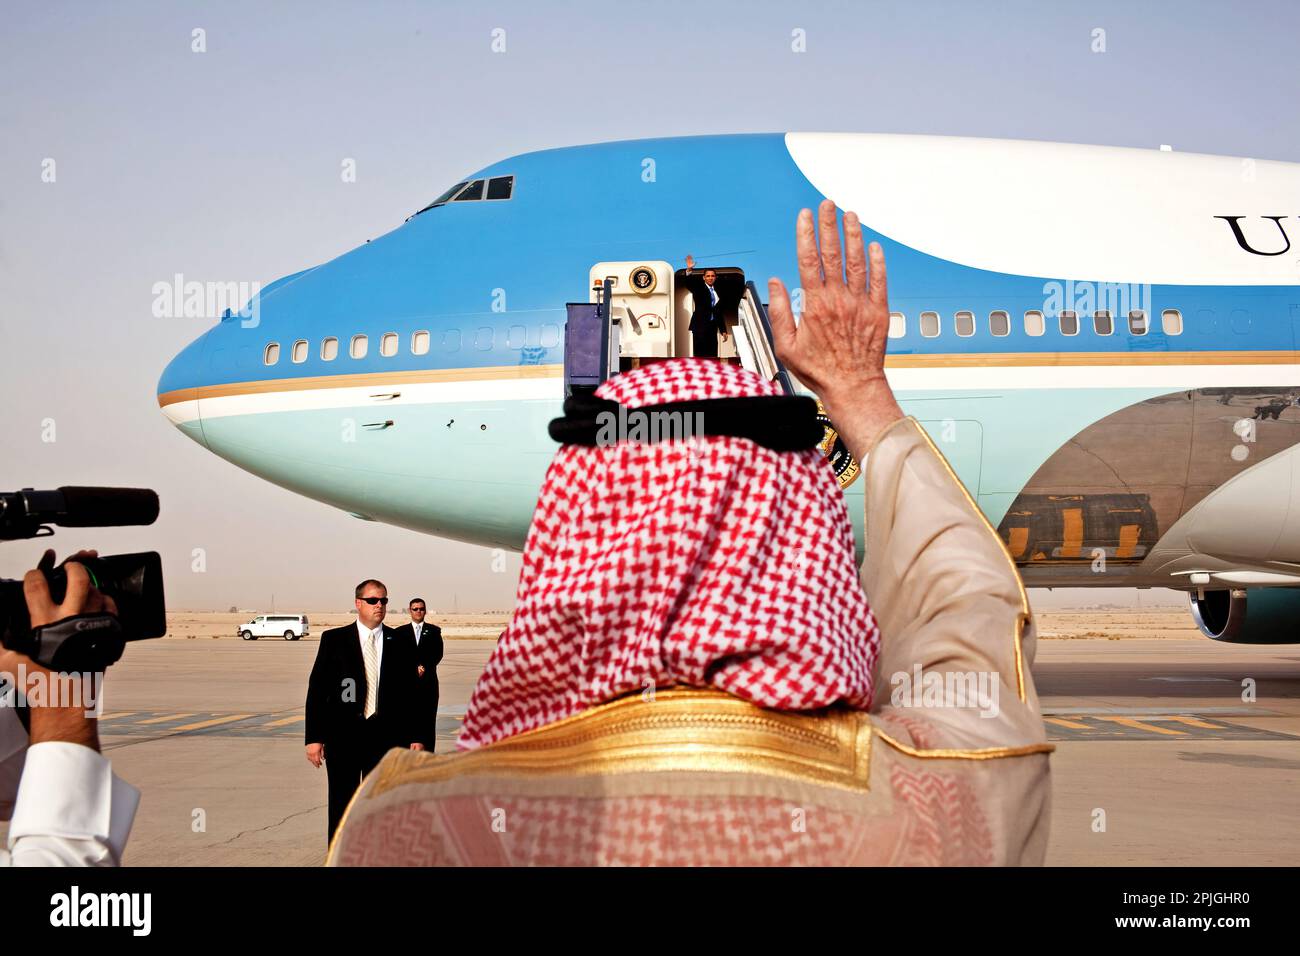 President Barack Obama waves goodbye from the steps of Air Force One as he departs King Khalid International Airport in Riyadh, Saudi Arabia on his way to Cairo, Egypt, June 4, 2009. (Official White House photo by Pete Souza) This official White House photograph is being made available for publication by news organizations and/or for personal use printing by the subject(s) of the photograph. The photograph may not be manipulated in any way or used in materials, advertisements, products, or promotions that in any way suggest approval or endorsement of the President, the First Family, or the Whi Stock Photo